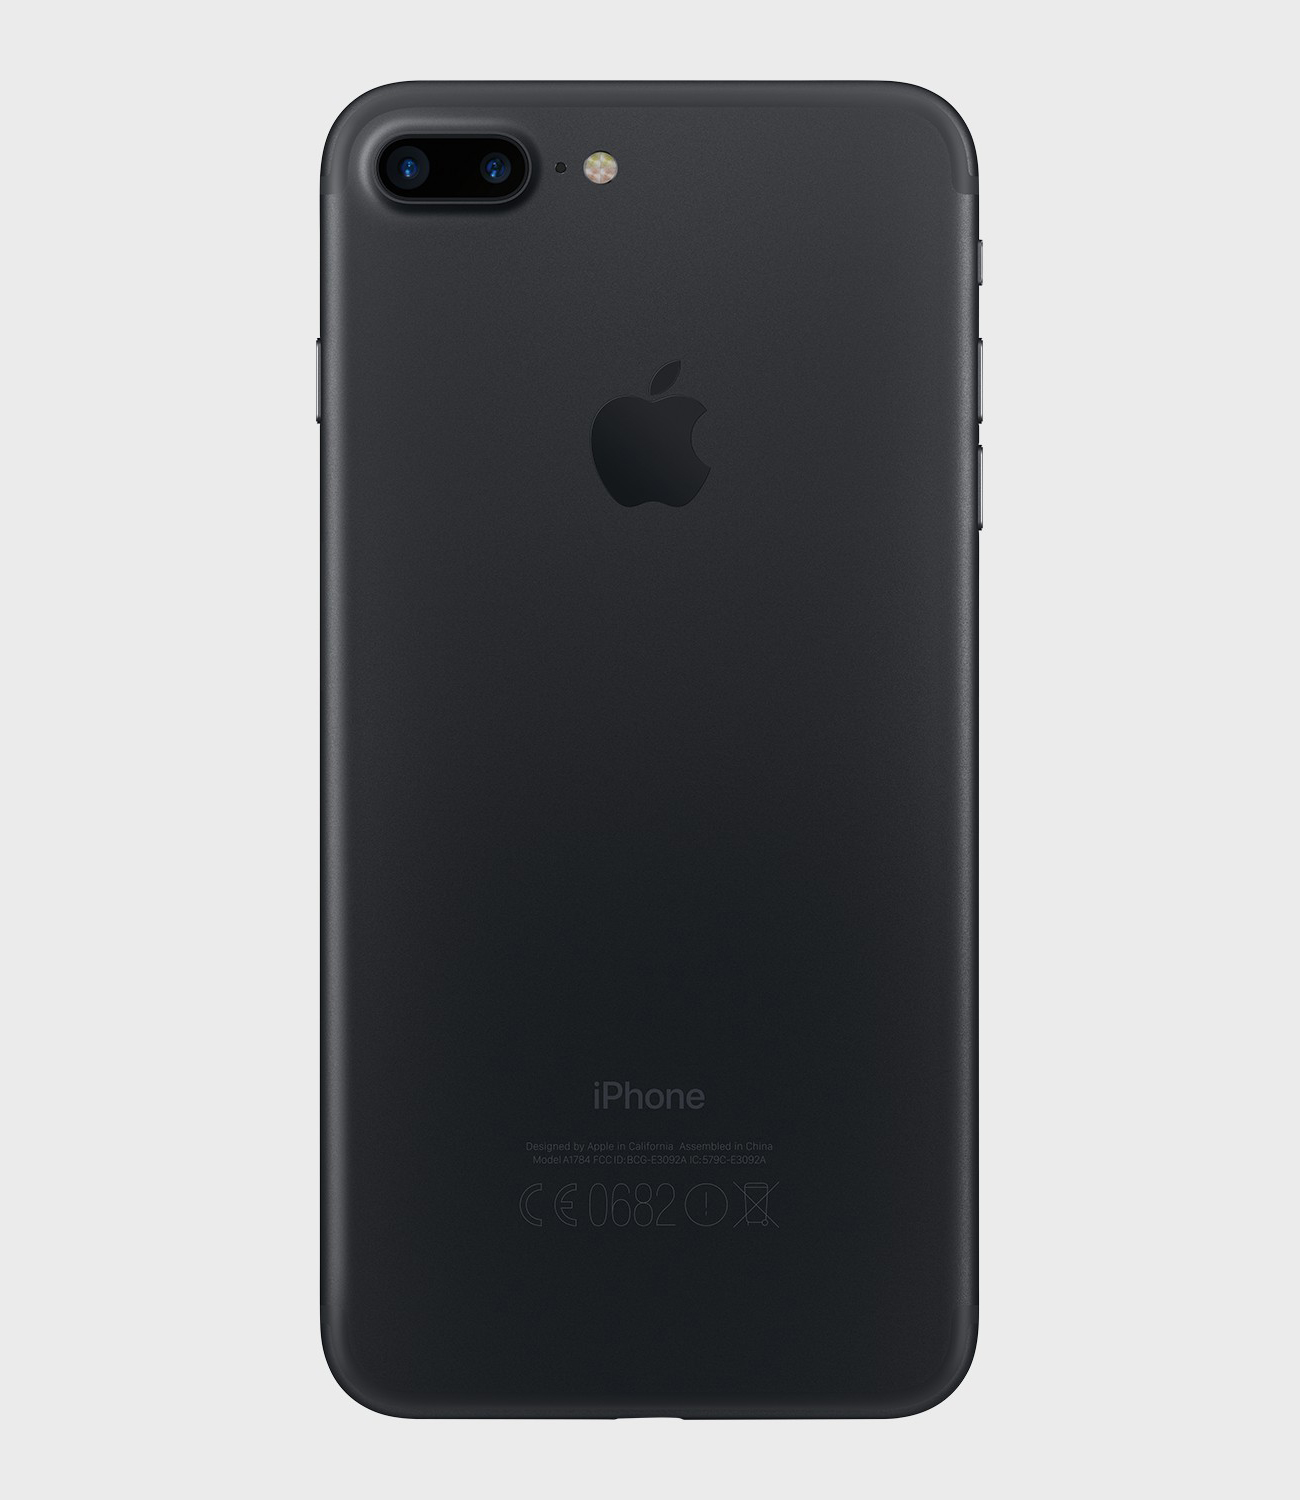 Apple Iphone 7 Plus 256gb Pictures Official Photos Whatmobile